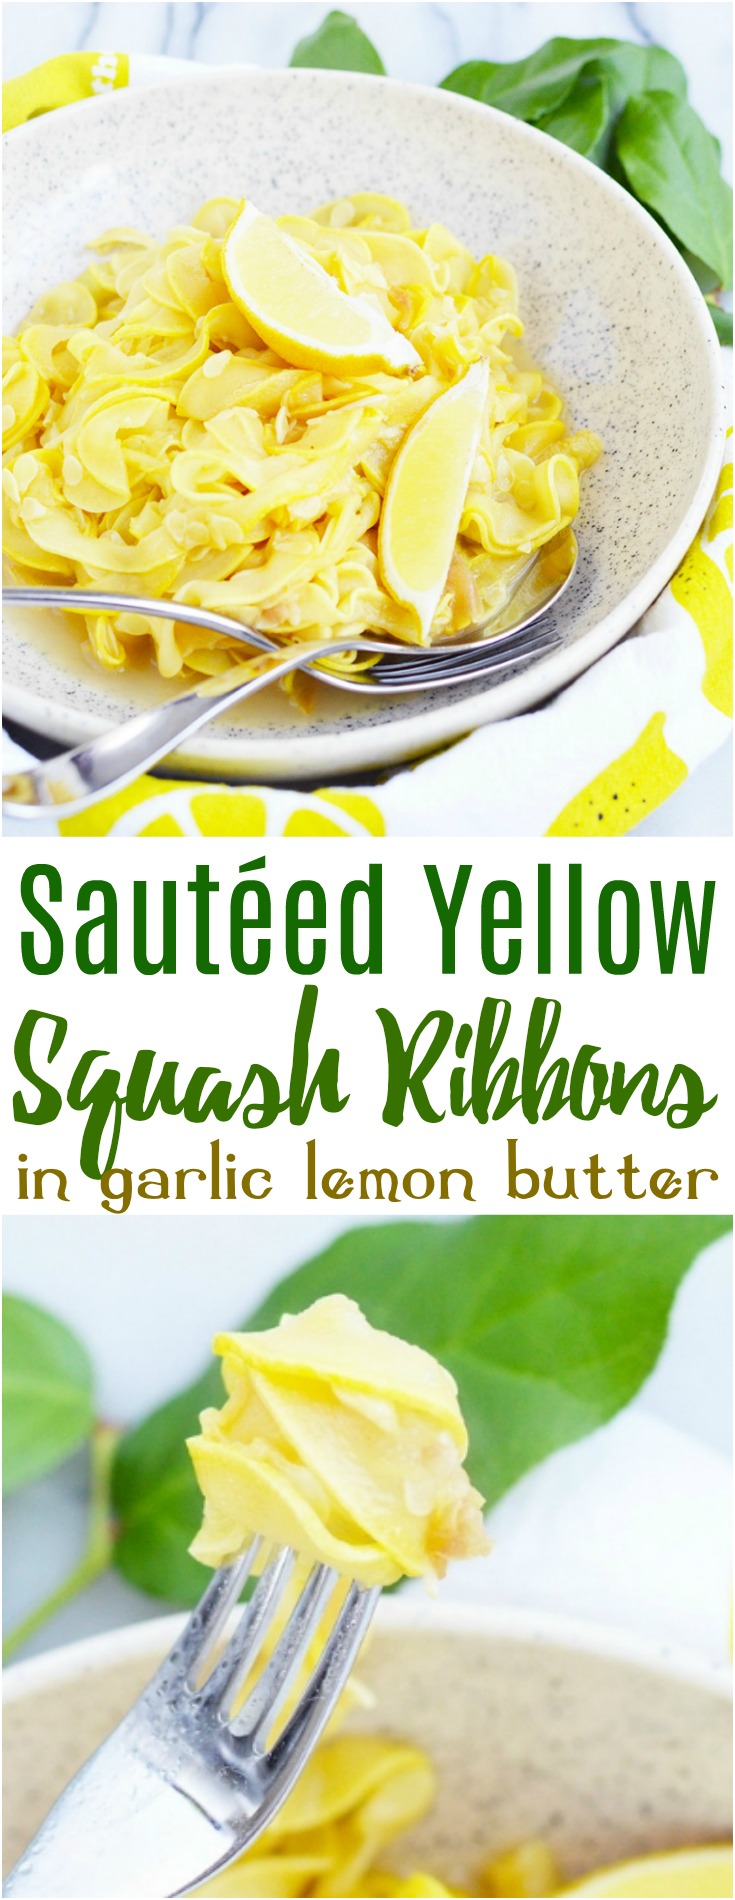 These pretty sautéed yellow squash ribbons are an easy way to dress up your dinner plate and a great way to use an abundance of yellow squash!  #yellowsquash #spiralizer #squash #vegetables #healthy #sidedish #glutenfree #garlic #lemon